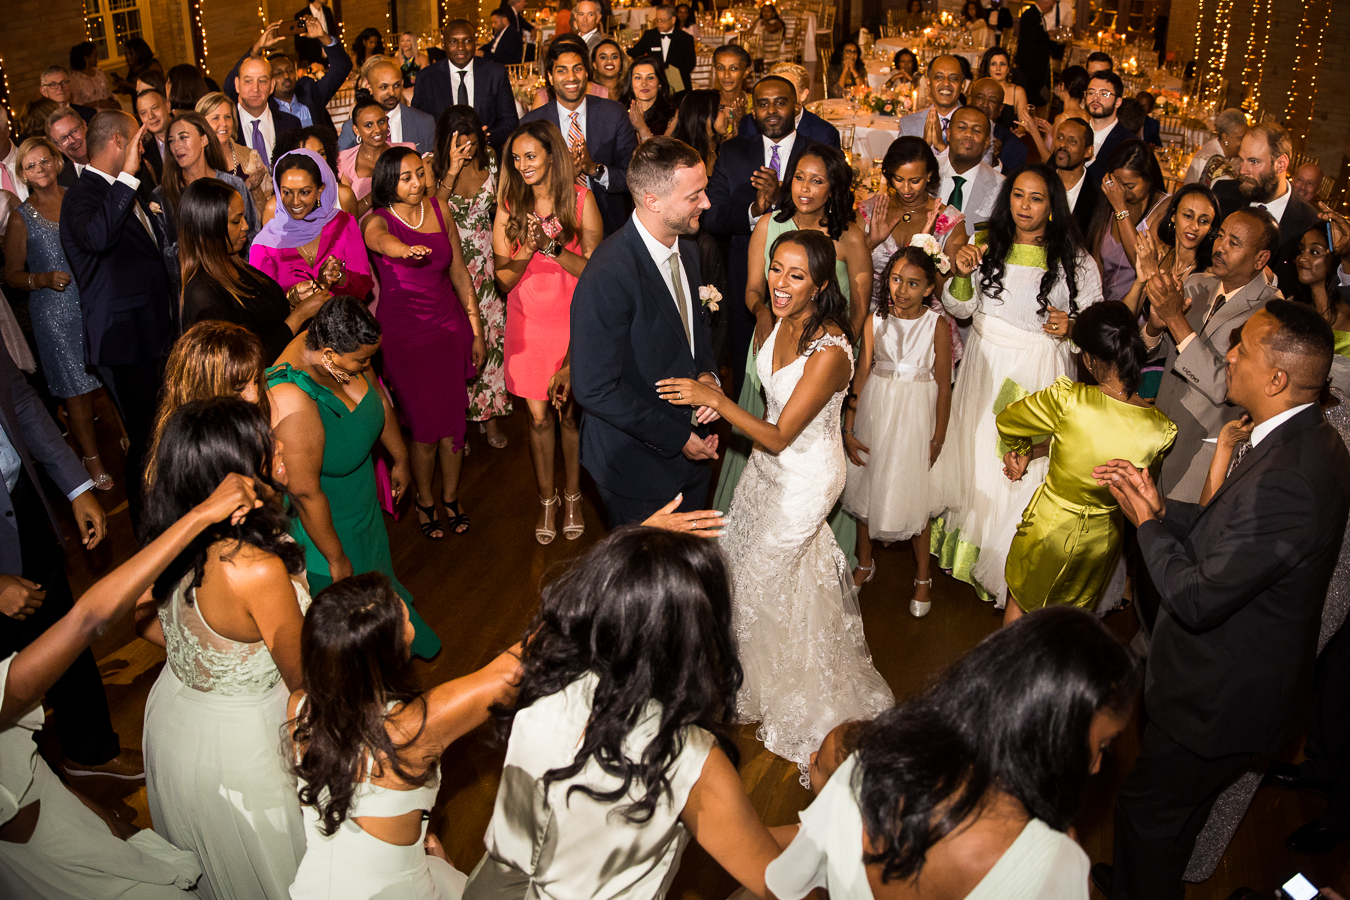 dc wedding photographer, lisa rhinehart, captures this image of the bride and groom in the middle of a dance circle as the ethiopian wedding traditions begin during this st francis hall wedding reception 